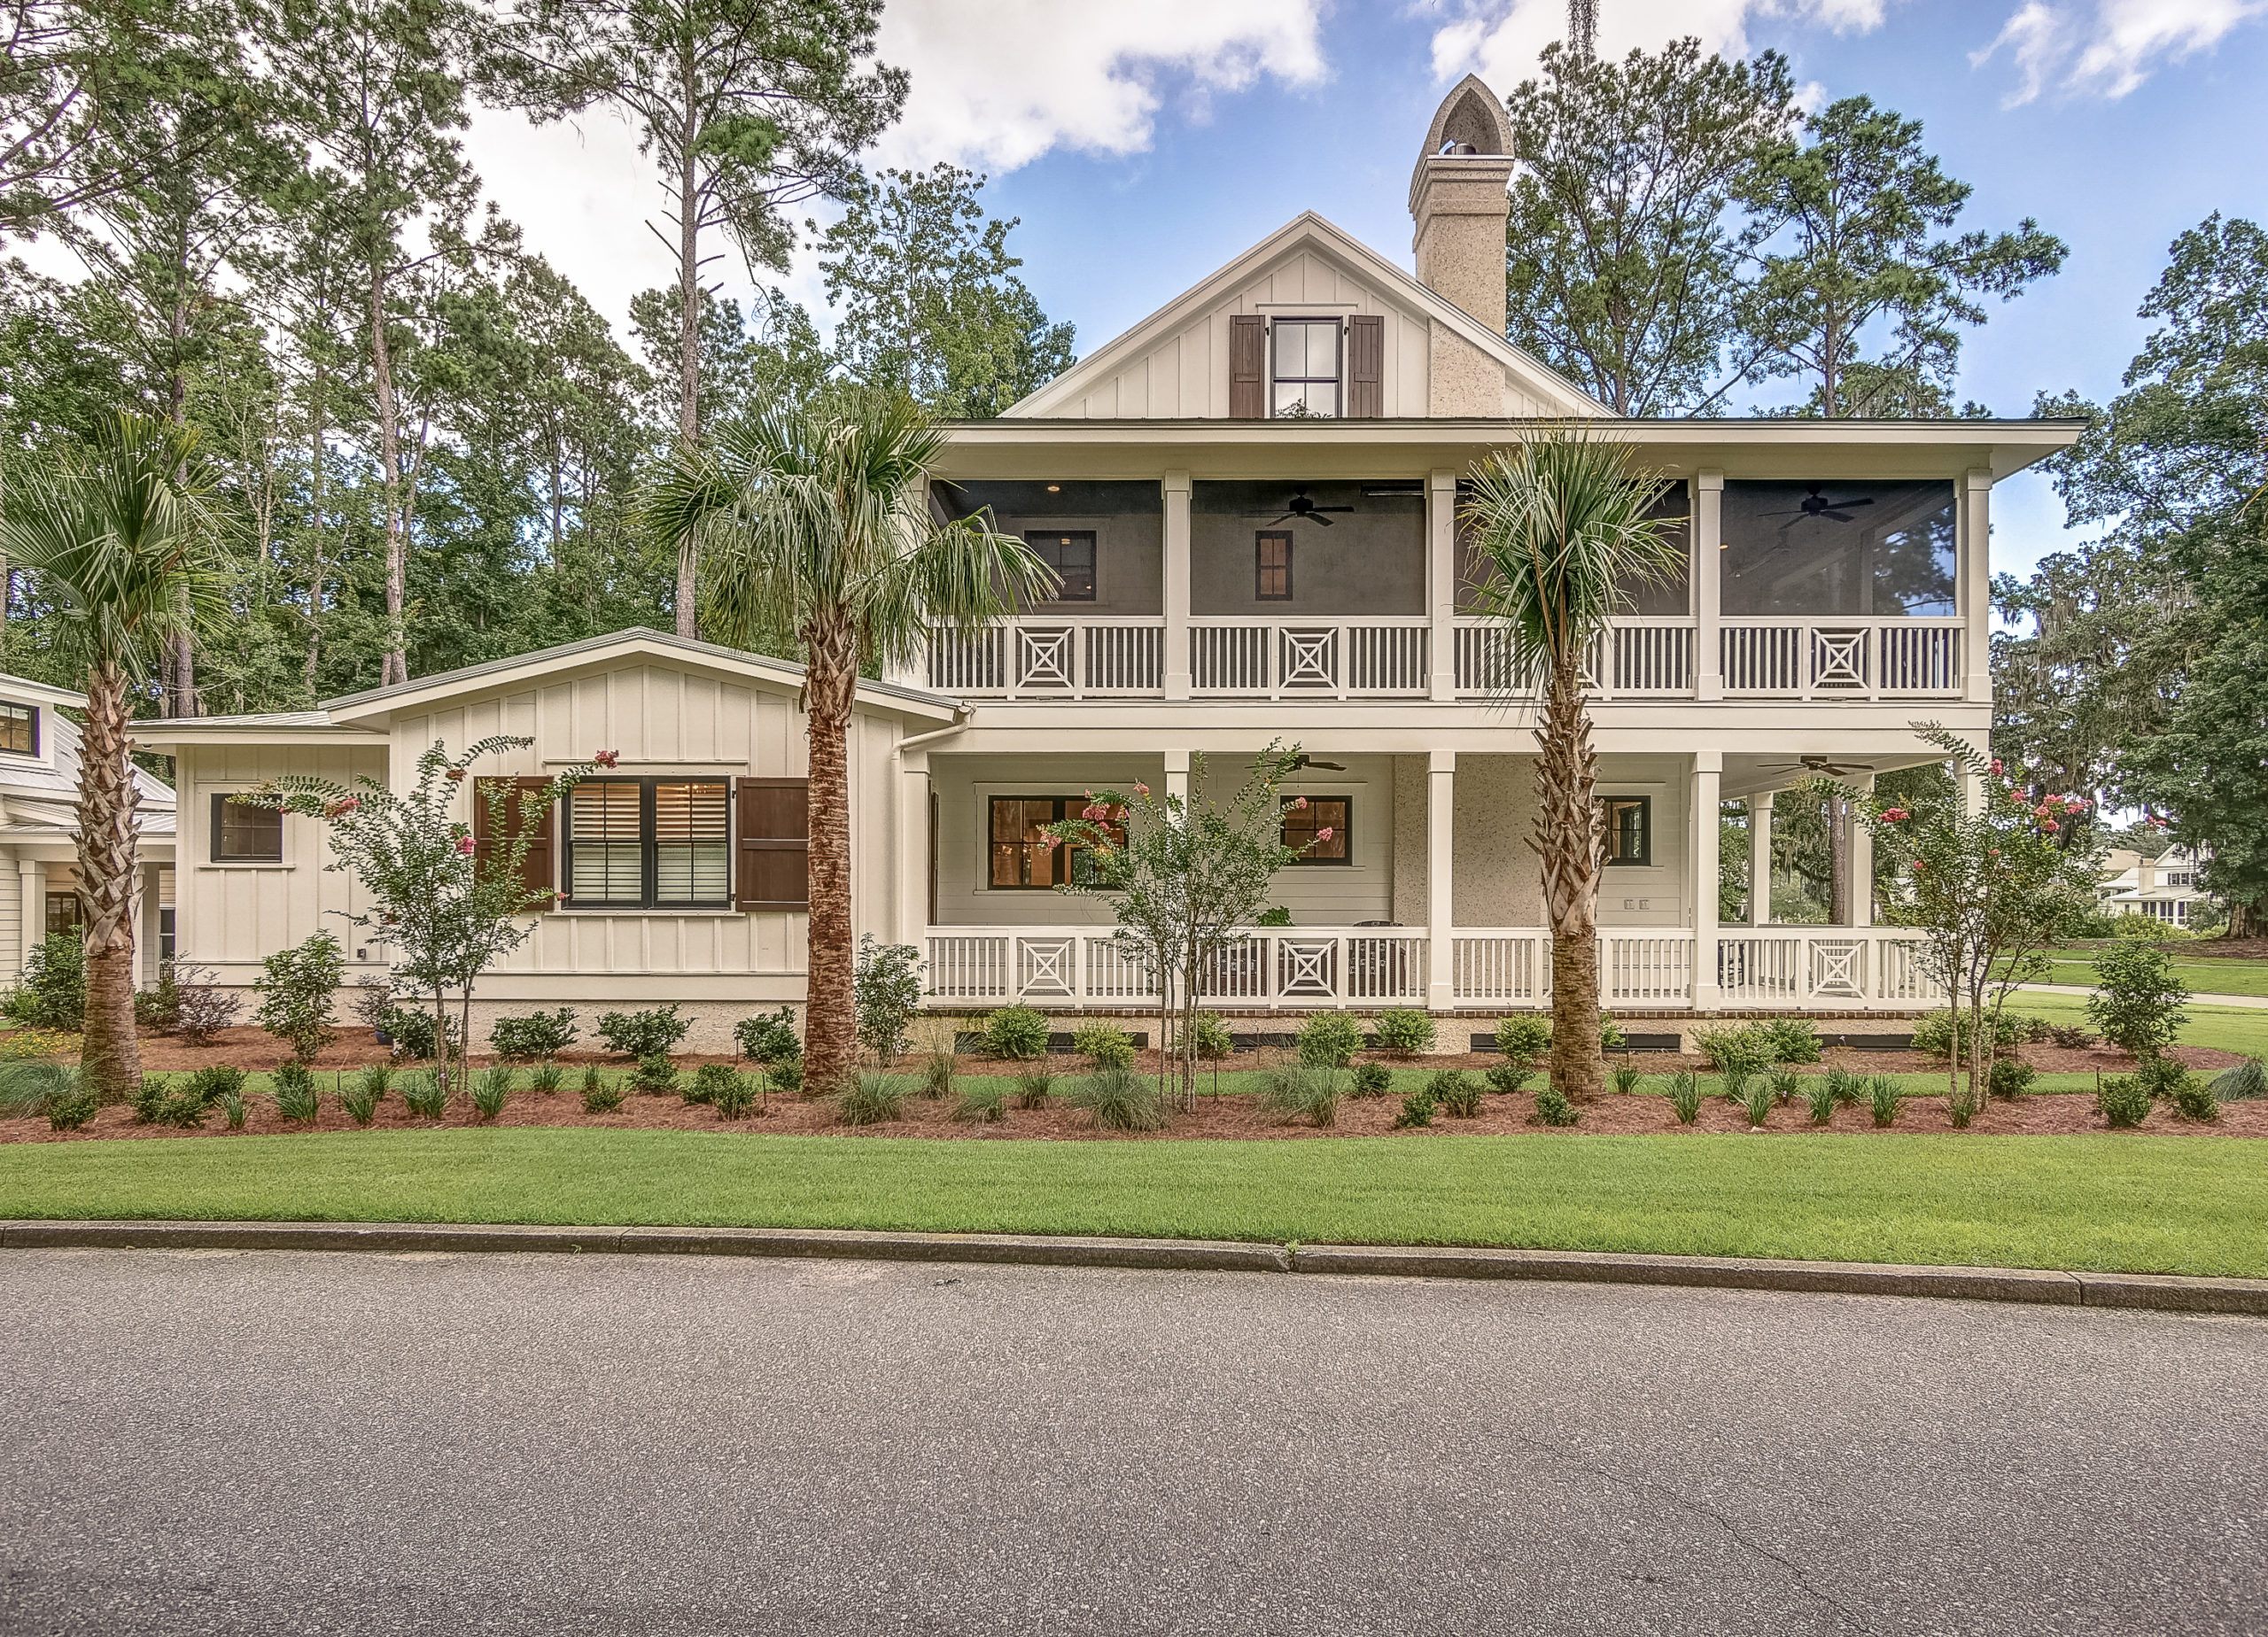 Project Delivery in Bluffton, SC | Full Circle Development